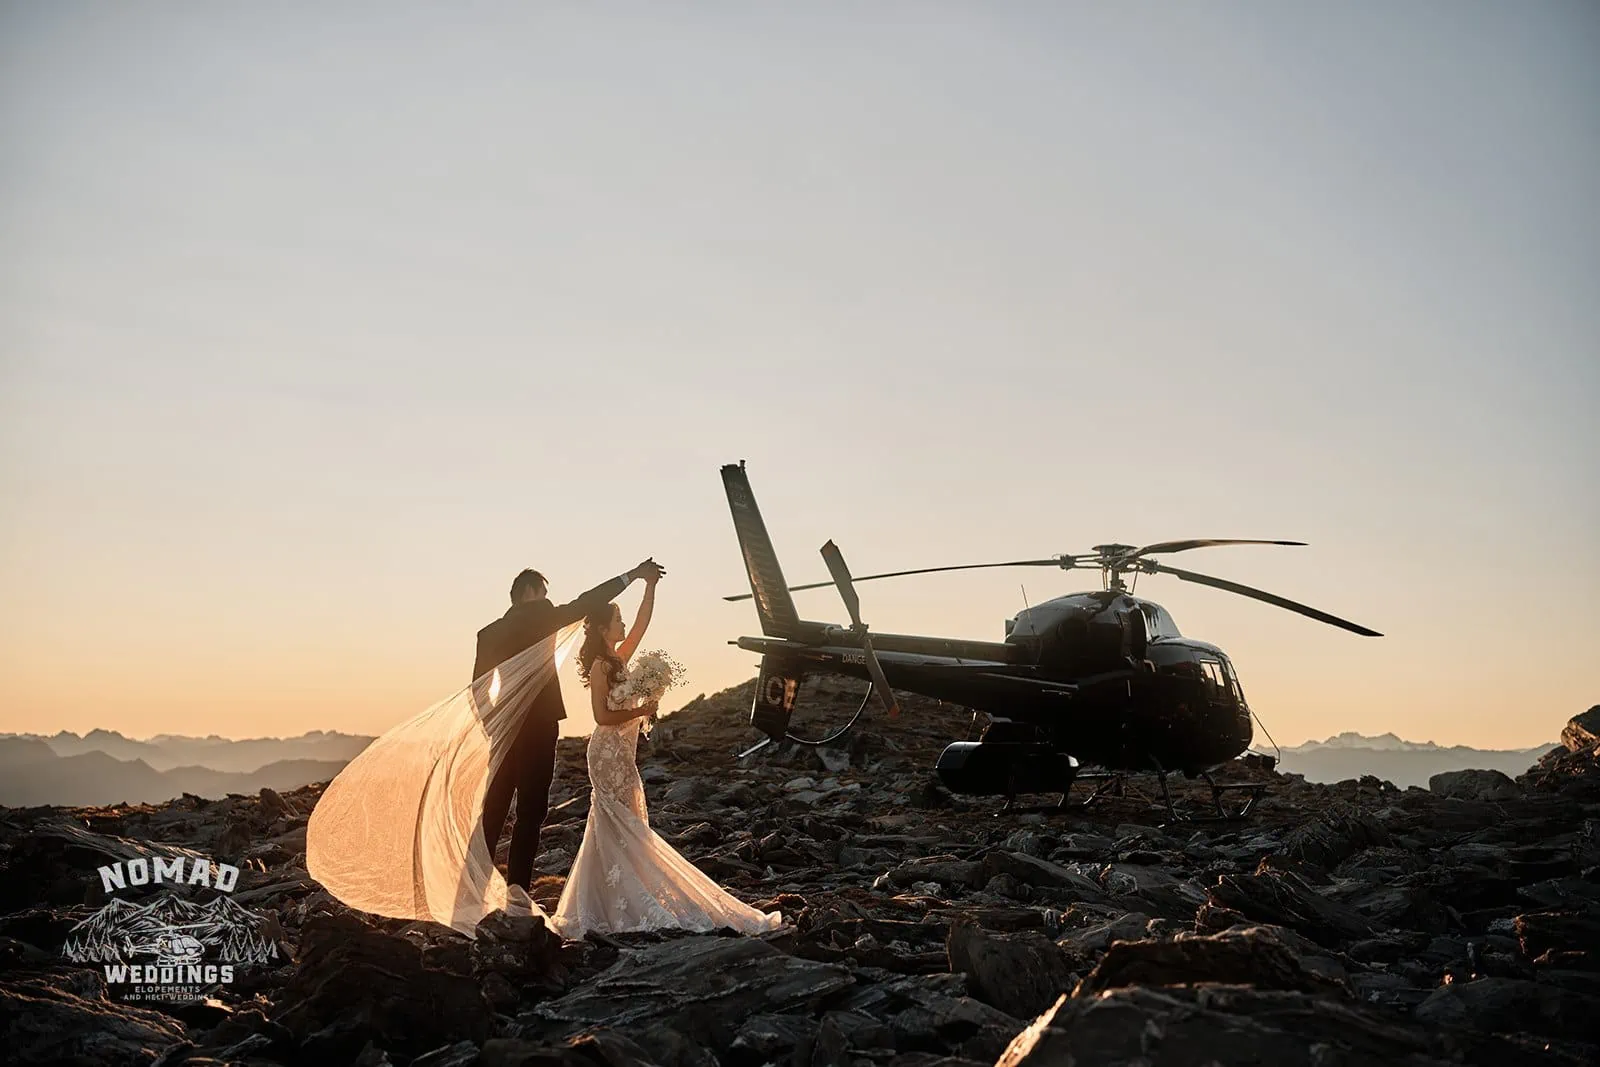 Connie and Andrew's remarkable pre-wedding shoot features a helicopter, sunset backdrop.